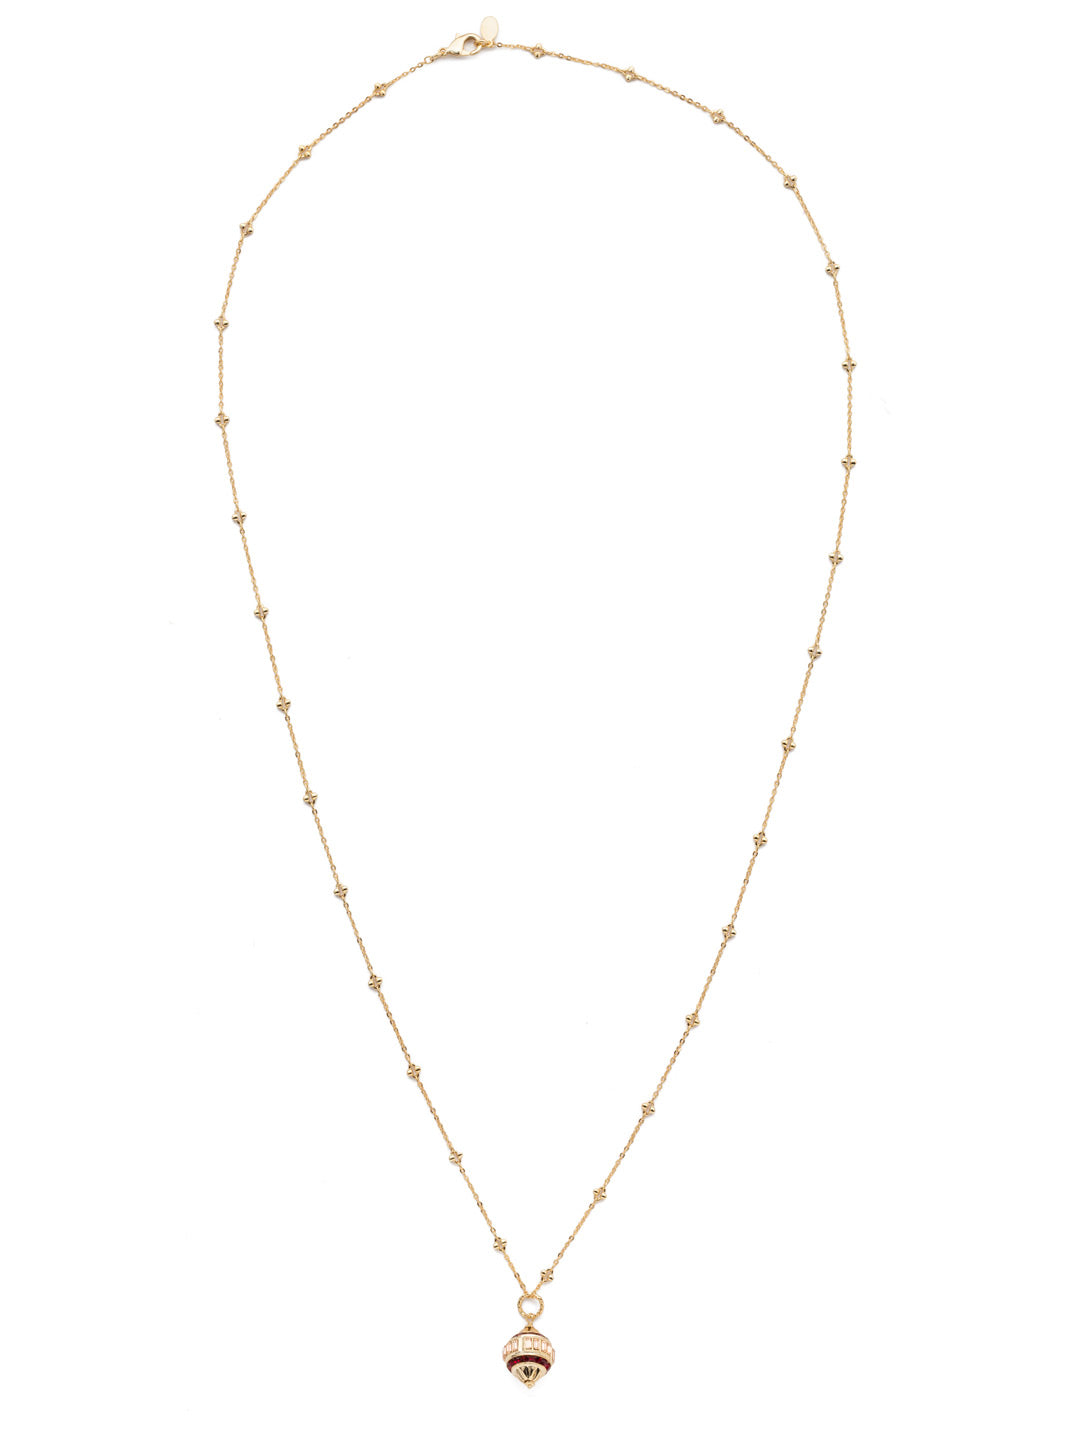 Lola Pendant Necklace - NEN14BGSRC - <p>The Lola Pendant Necklace dangles something completely unique and sparkly front and center, accented by smaller gems on a delicate chain. Make it the special standout piece in your jewelry collection. From Sorrelli's Scarlet Champagne  collection in our Bright Gold-tone finish.</p>